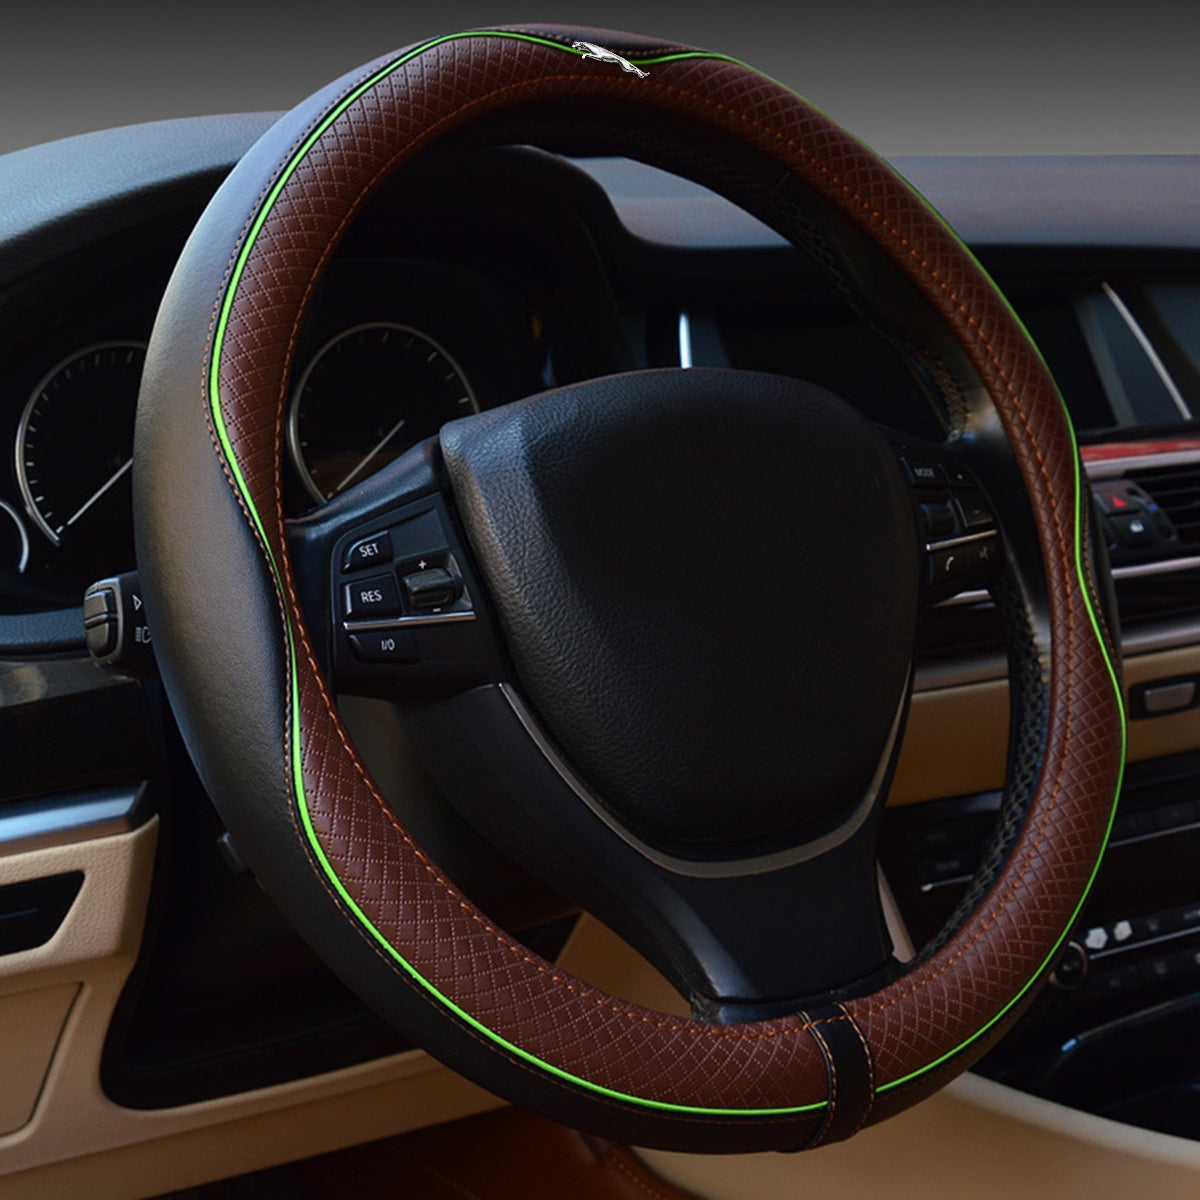 Enhance Your Ride with a Stylish Jaguar Steering Wheel Cover